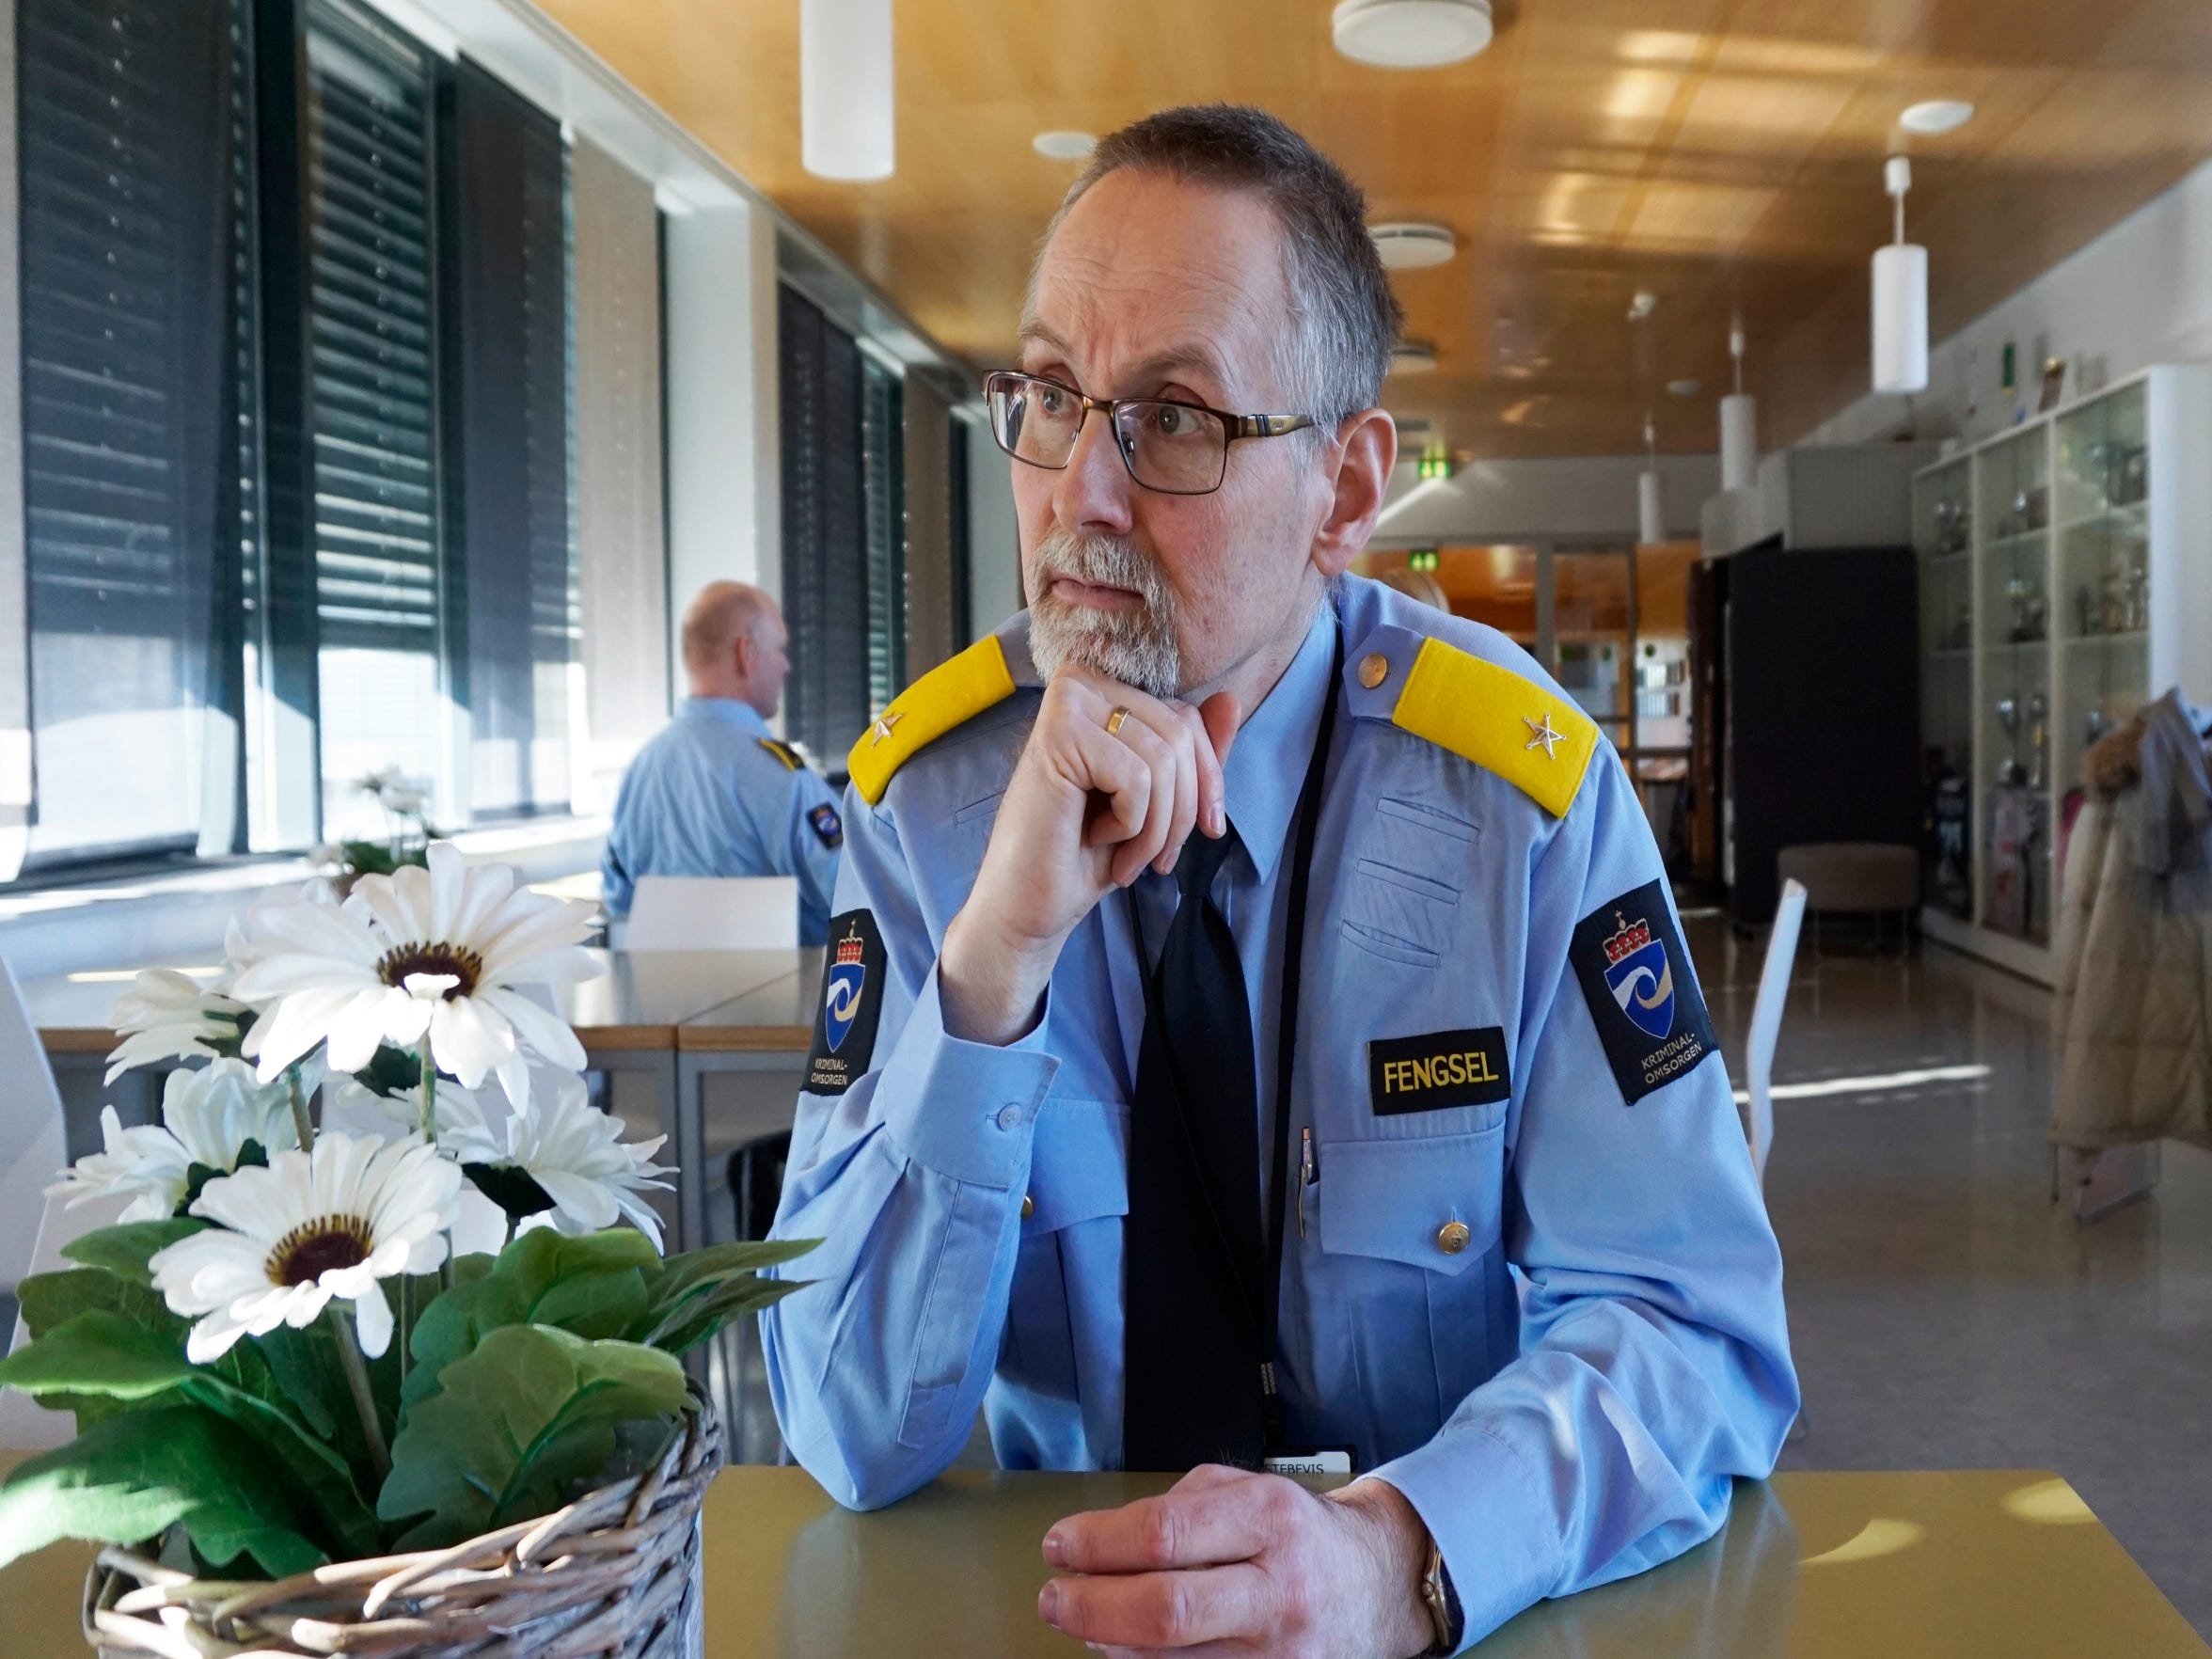 Jan R. Stromnes, deputy governor of Halden Prison in Norway, says his country's correctional system is focused on 